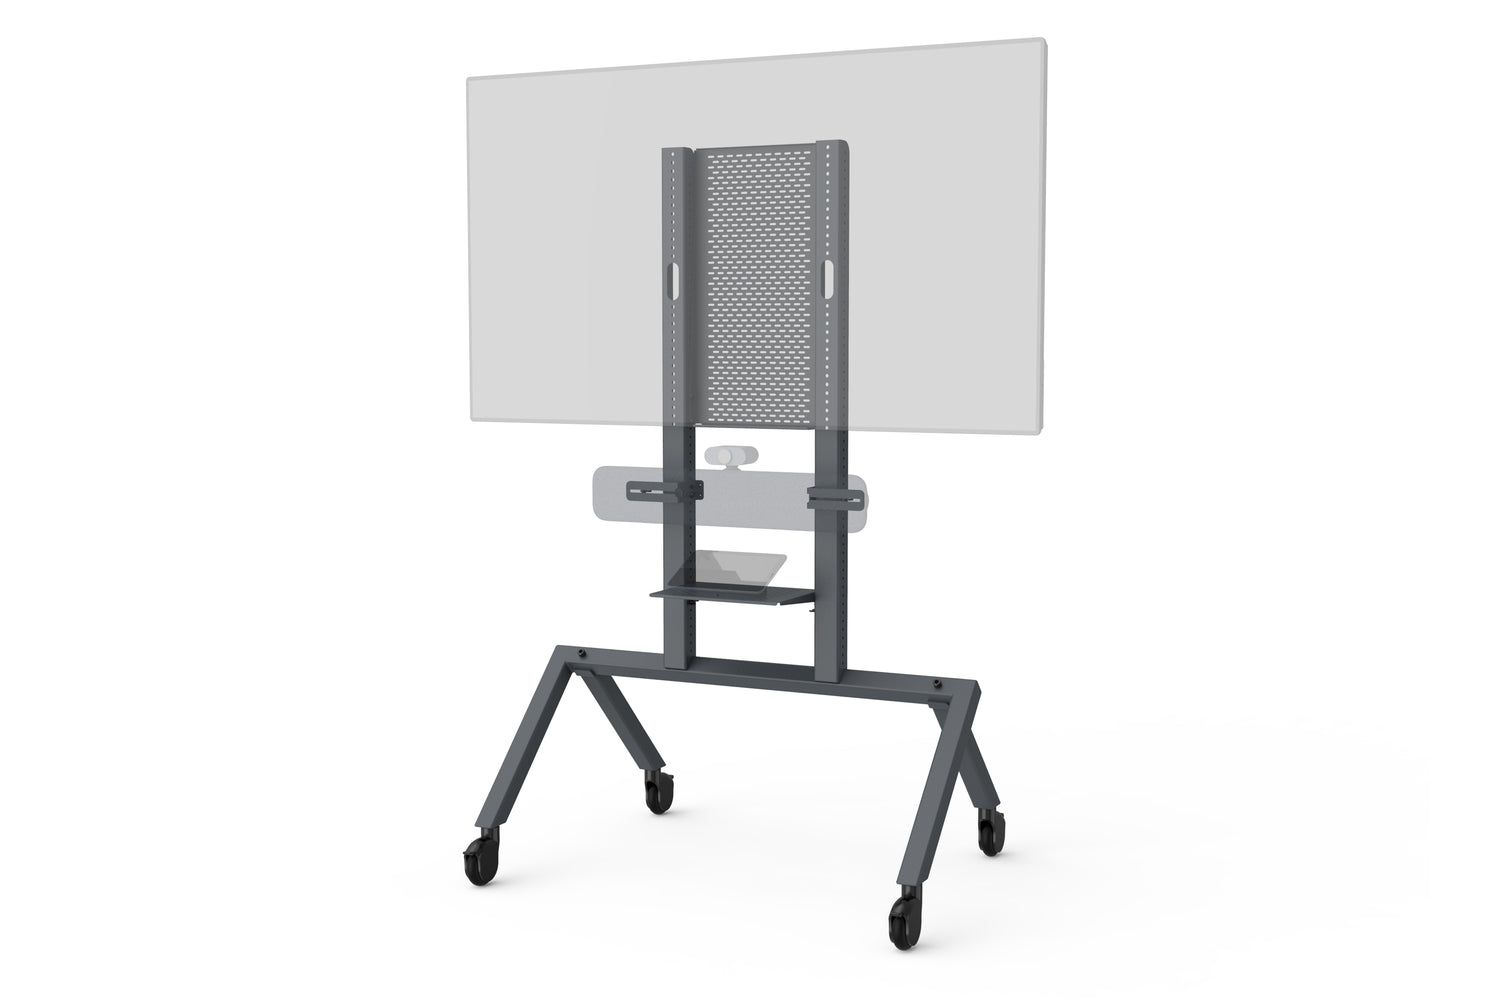 Buy a Mobile Flip Chart Easel discounted rate at